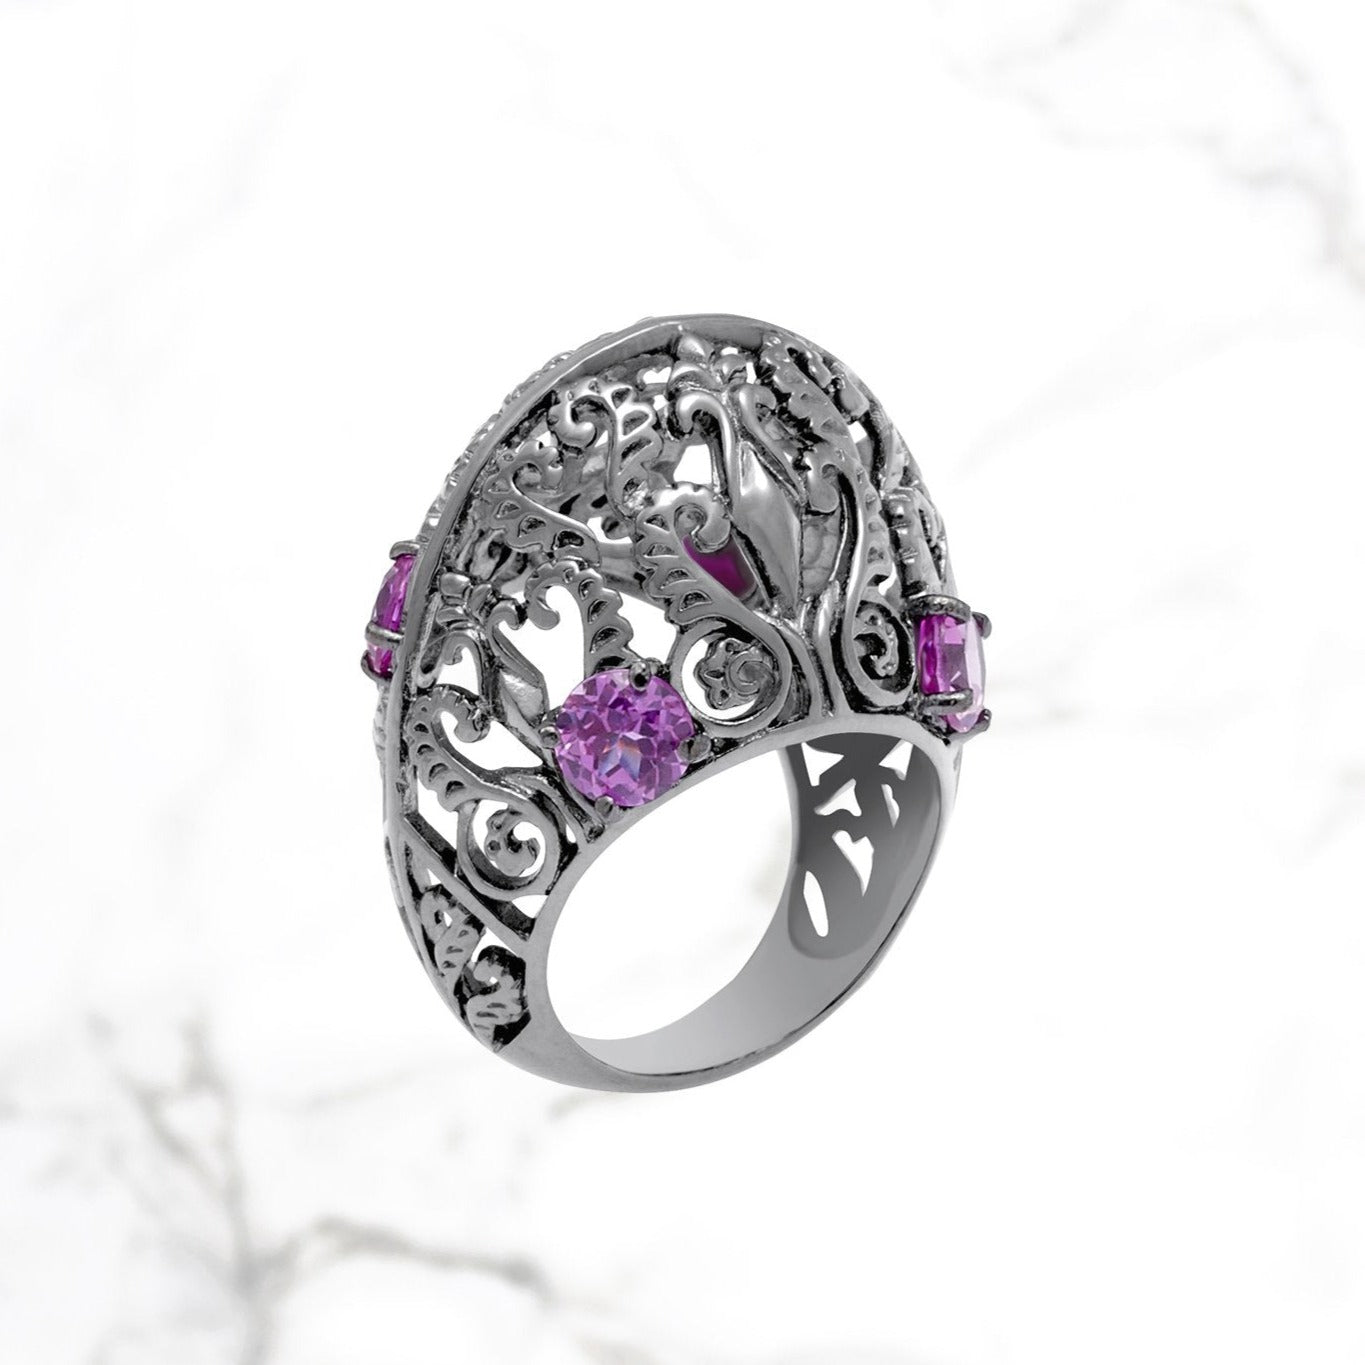 Handcrafted M2 dome ring with lab-grown pink sapphire